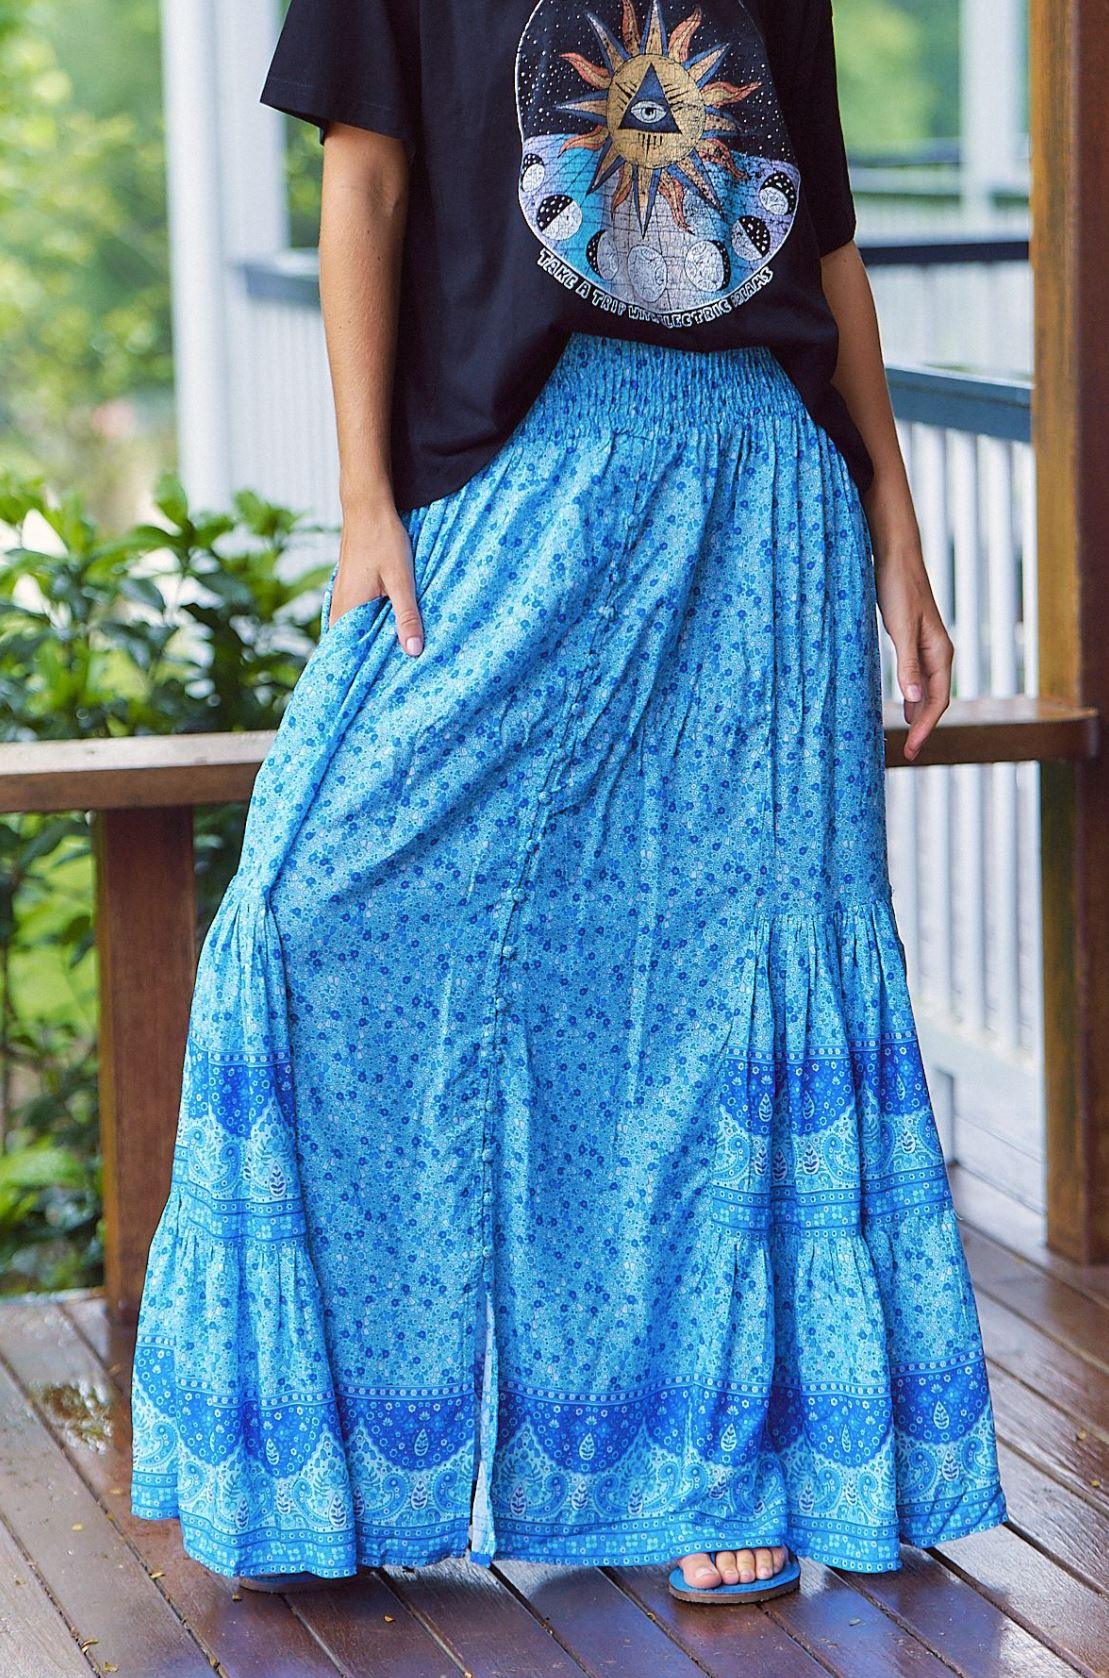 20 Long Skirt Outfits to Wear for Any Occasion